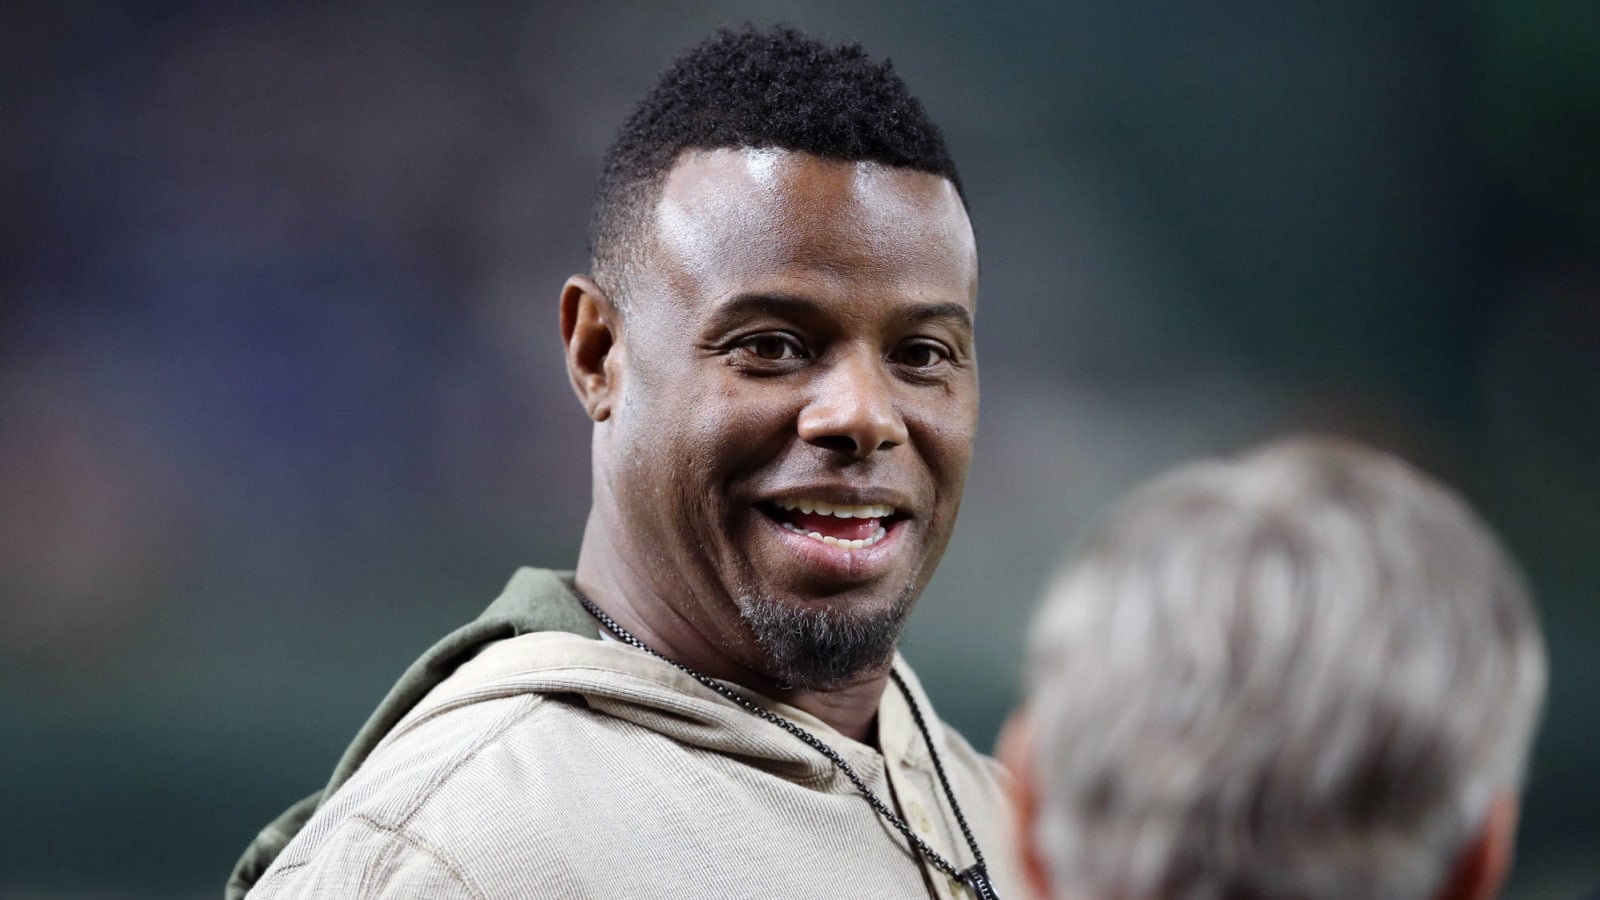 Ken Griffey Jr. reveals why he never wanted to play for the